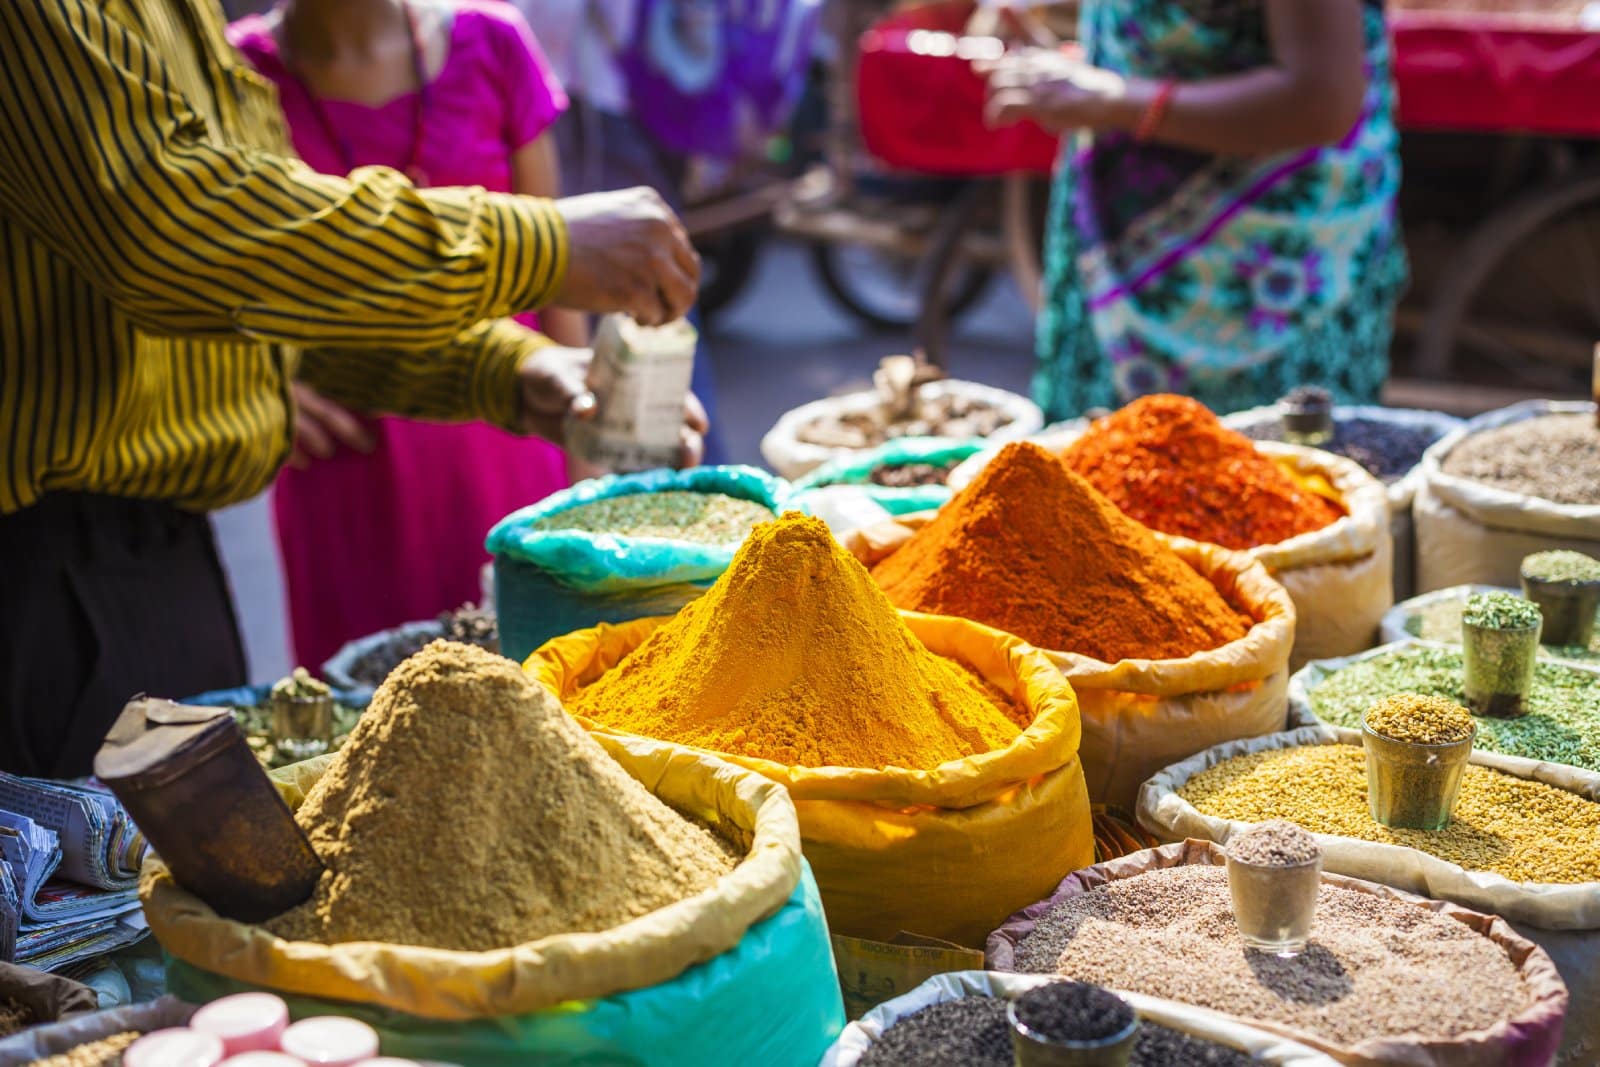 <p class="wp-caption-text">Image Credit: Shutterstock / Curioso.Photography</p>  <p><span>Delhi’s markets are a vibrant example of India’s diverse culture, offering everything from luxurious silk fabrics to handcrafted artifacts. Chandni Chowk, one of the oldest and busiest markets in Old Delhi, provides a sensory overload with its narrow lanes filled with the scent of spices and colorful textiles. For a more upscale shopping experience, Khan Market offers branded boutiques, excellent bookshops, and some of Delhi’s best cafes and restaurants.</span></p>